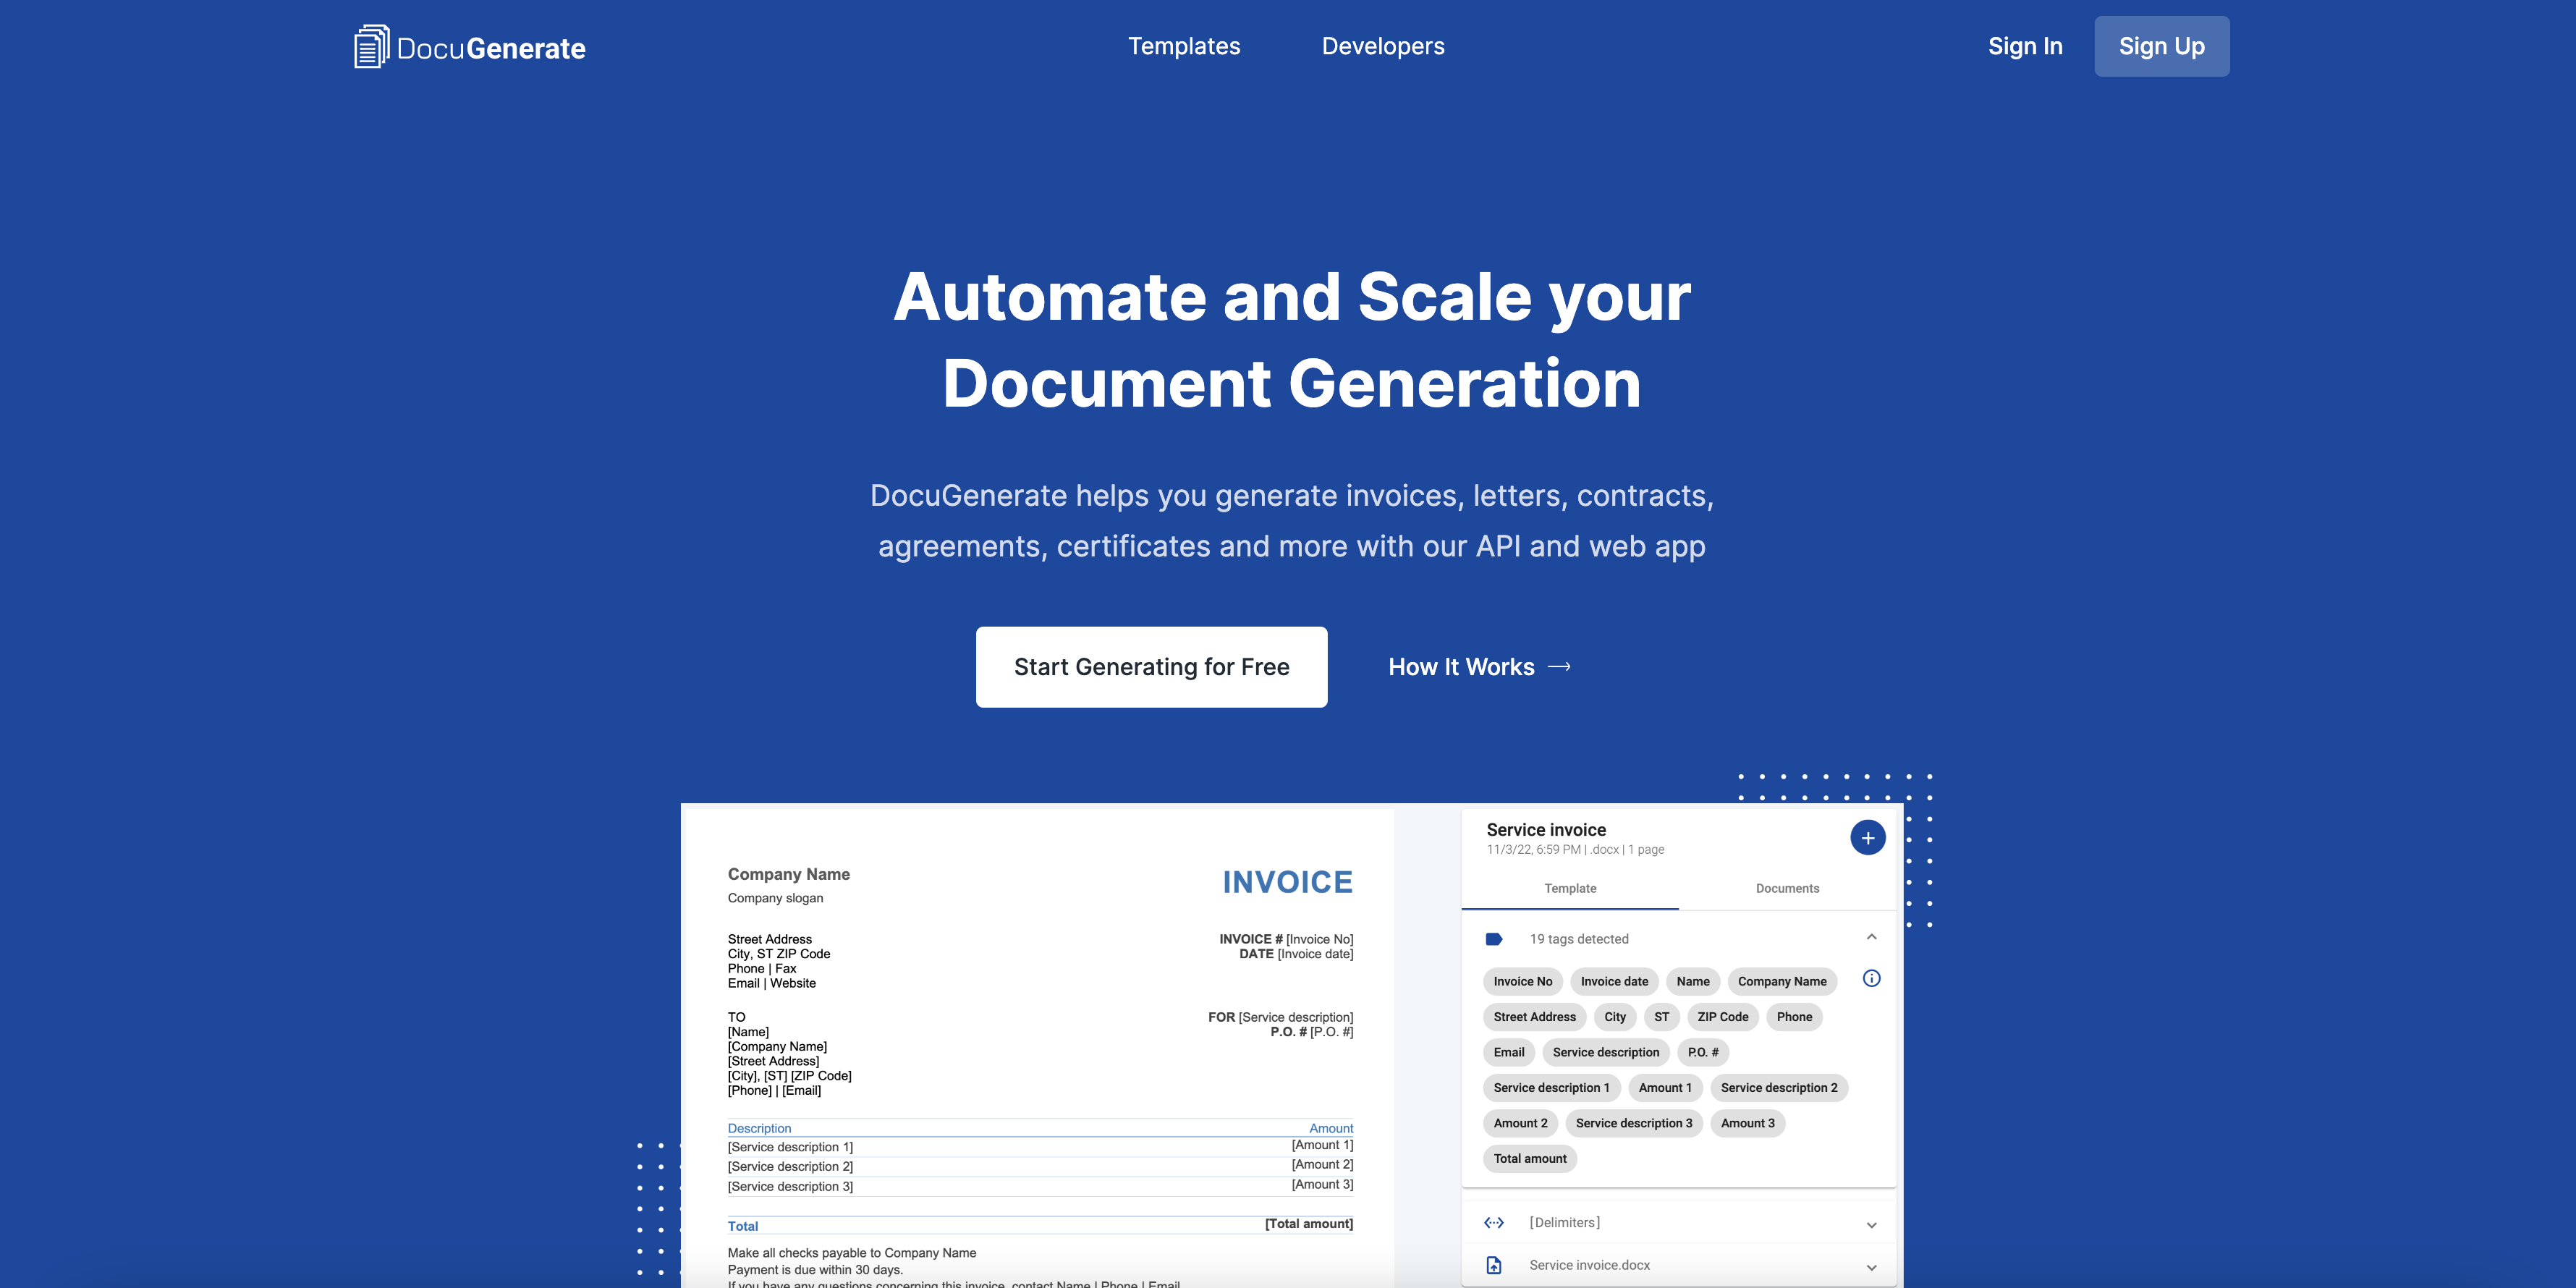 Automate and Scale your Document Generation. DocuGenerate helps you generate invoices, letters, contracts, agreements, certificates and more with our API and web app.